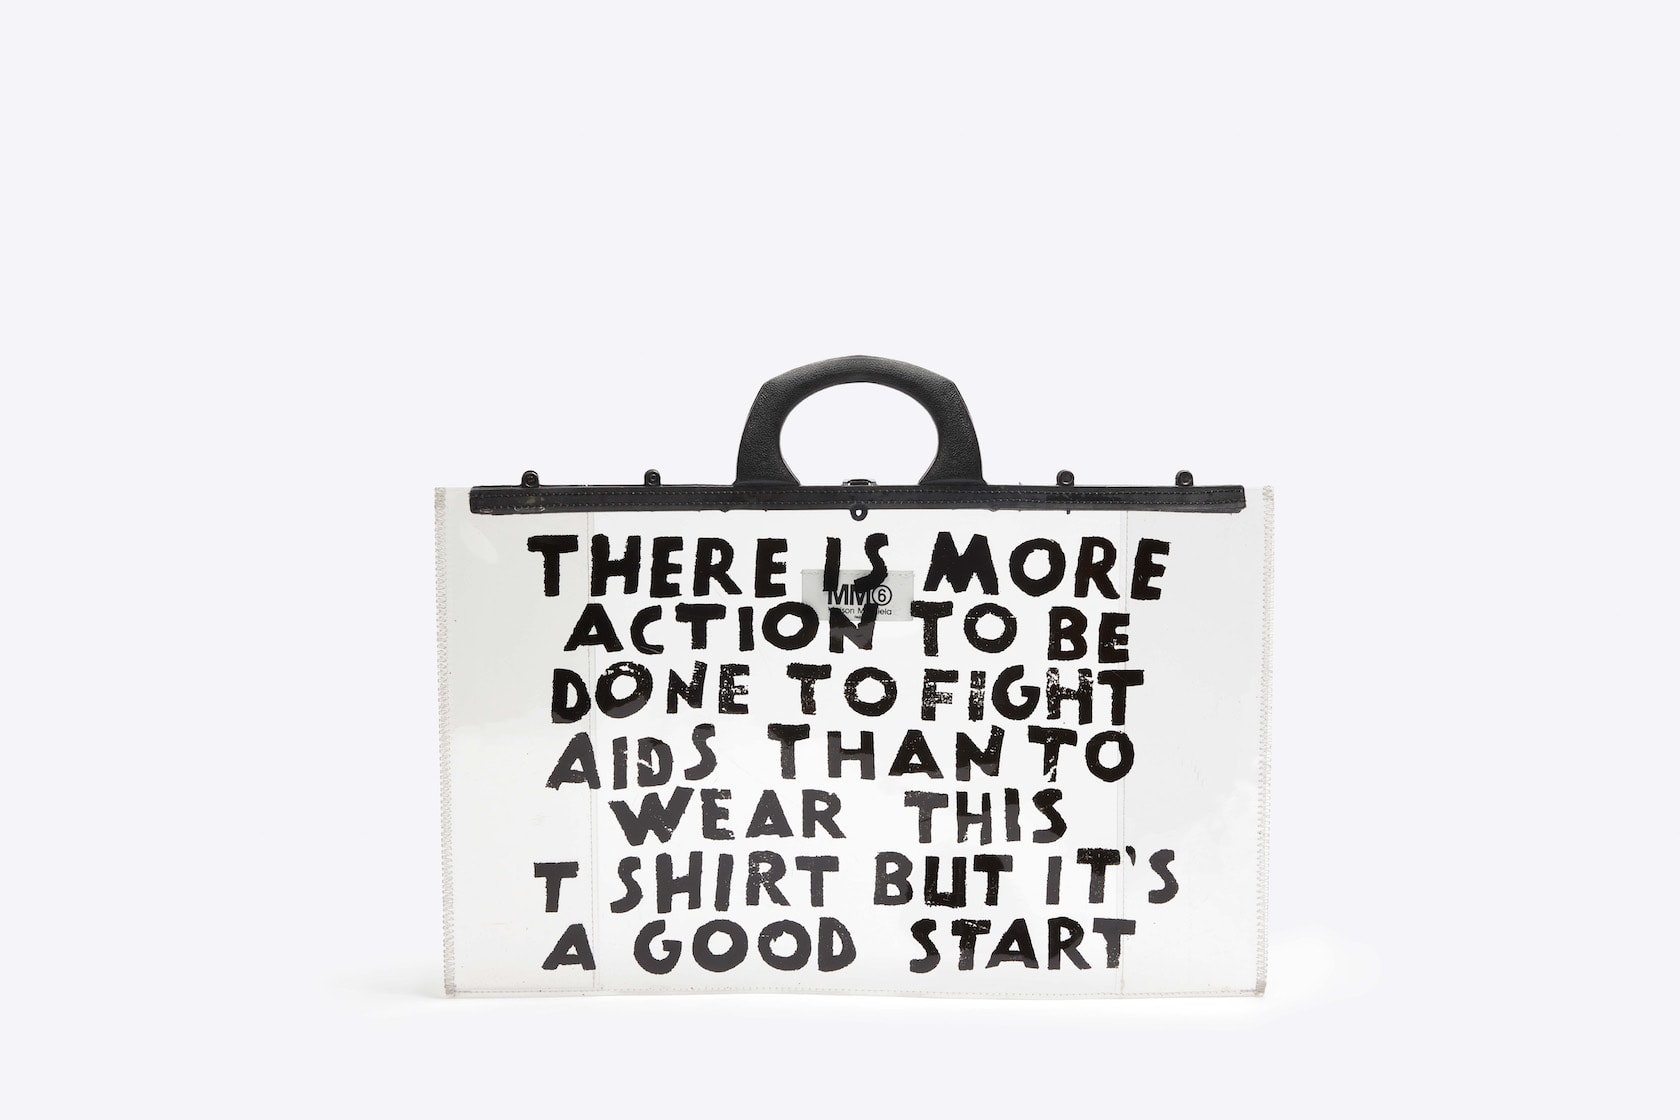 MM6 Maison Margiela Charity Capsule Collection Tote Bag Slogan HIV Aids Project AIDES Organization